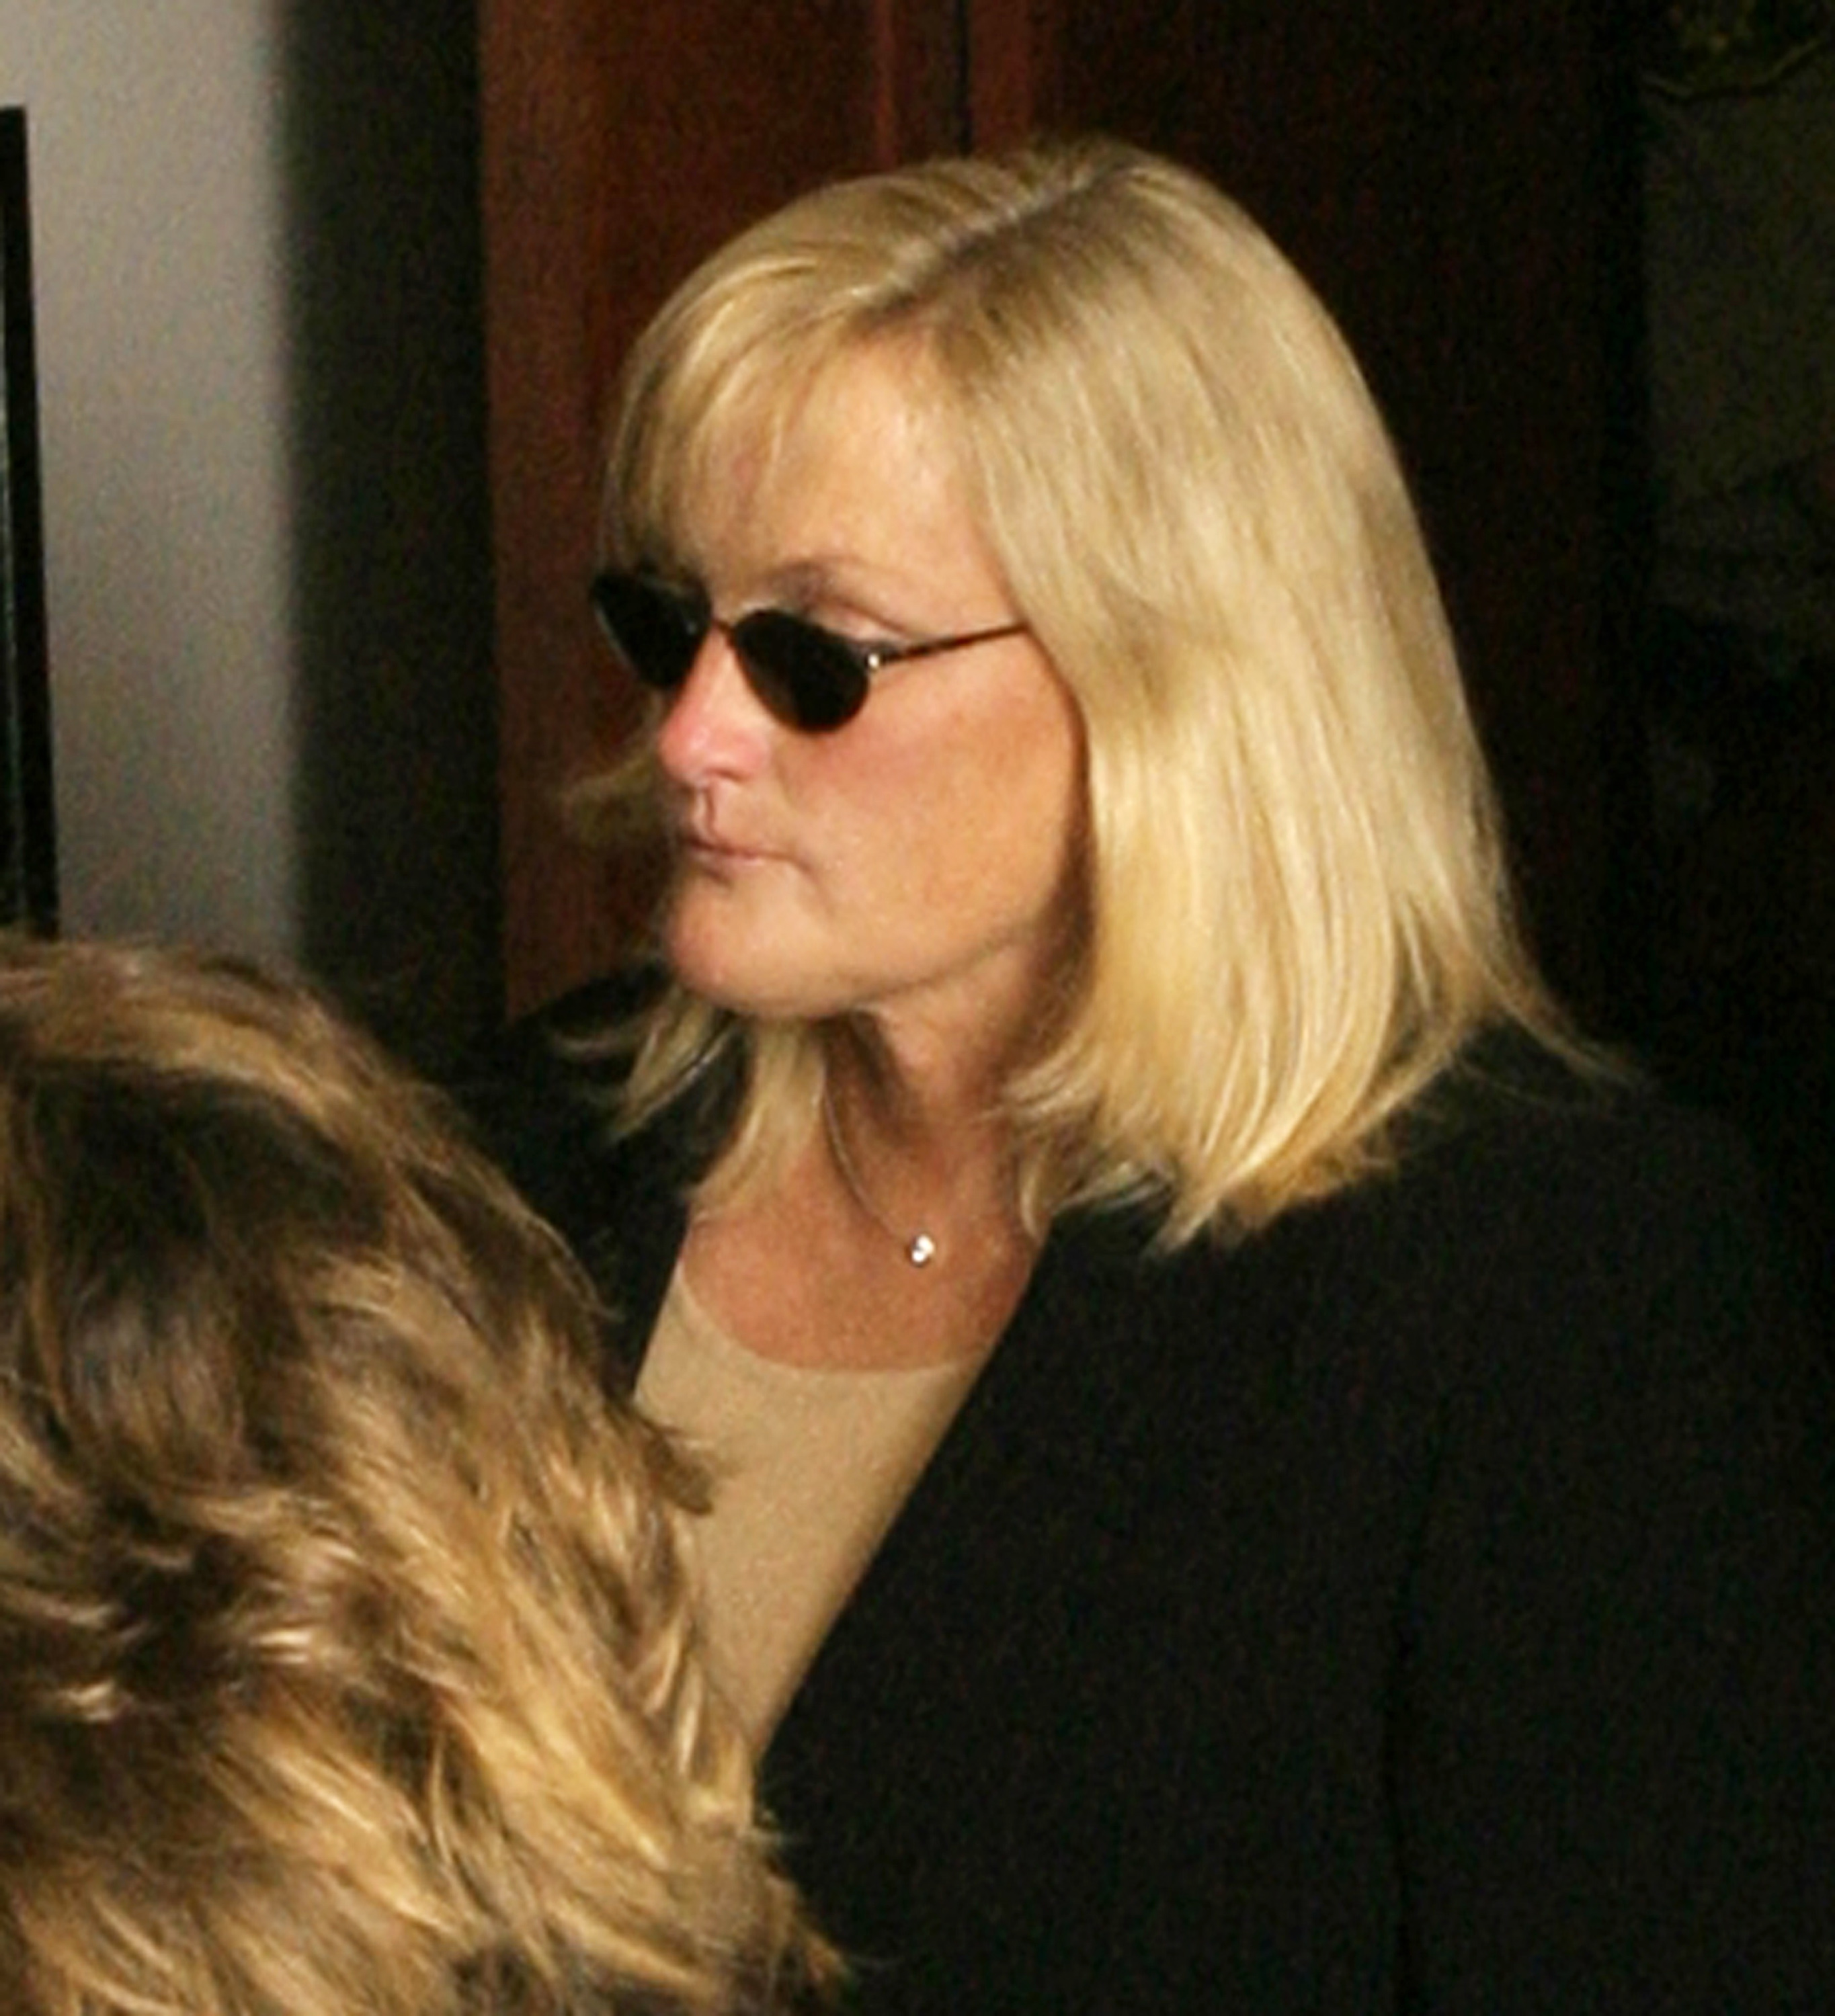 Debbie Rowe leaves the courtroom at the Santa Barbara County courthouse on April 27, 2005 in Santa Maria, California. | Source: Getty Images